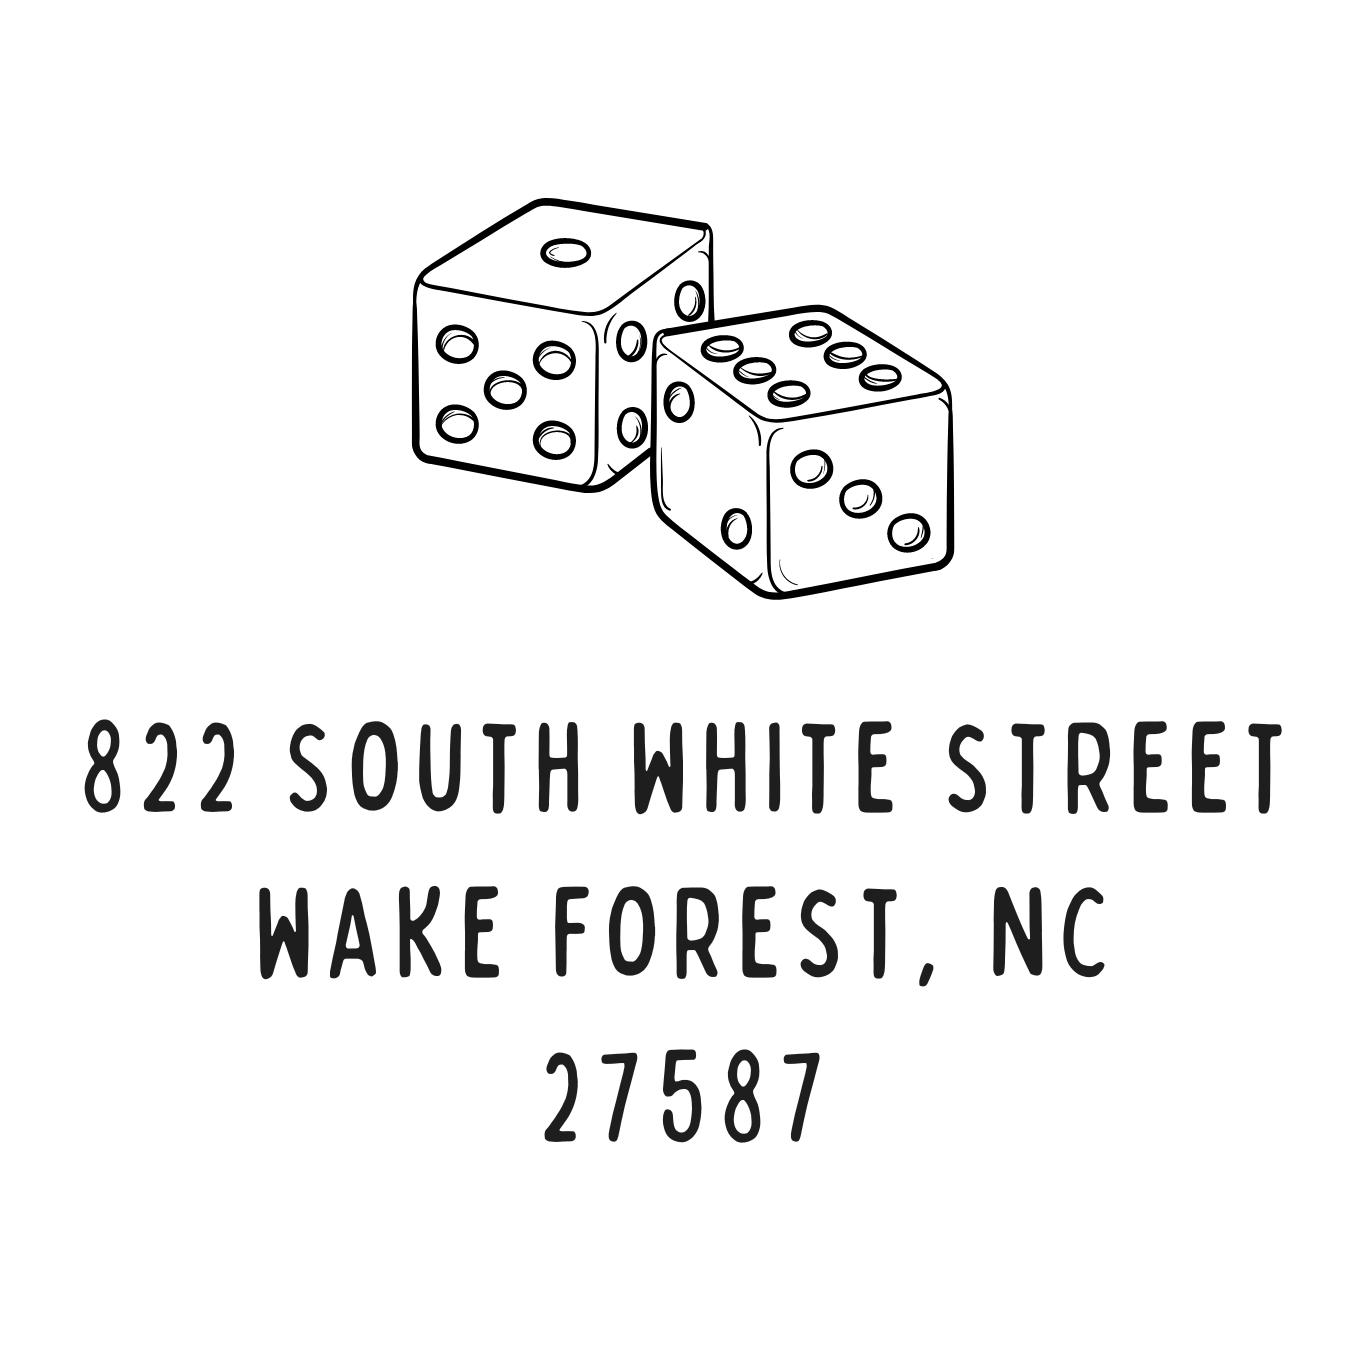 822 South White Street Wake Forest, NC 27587